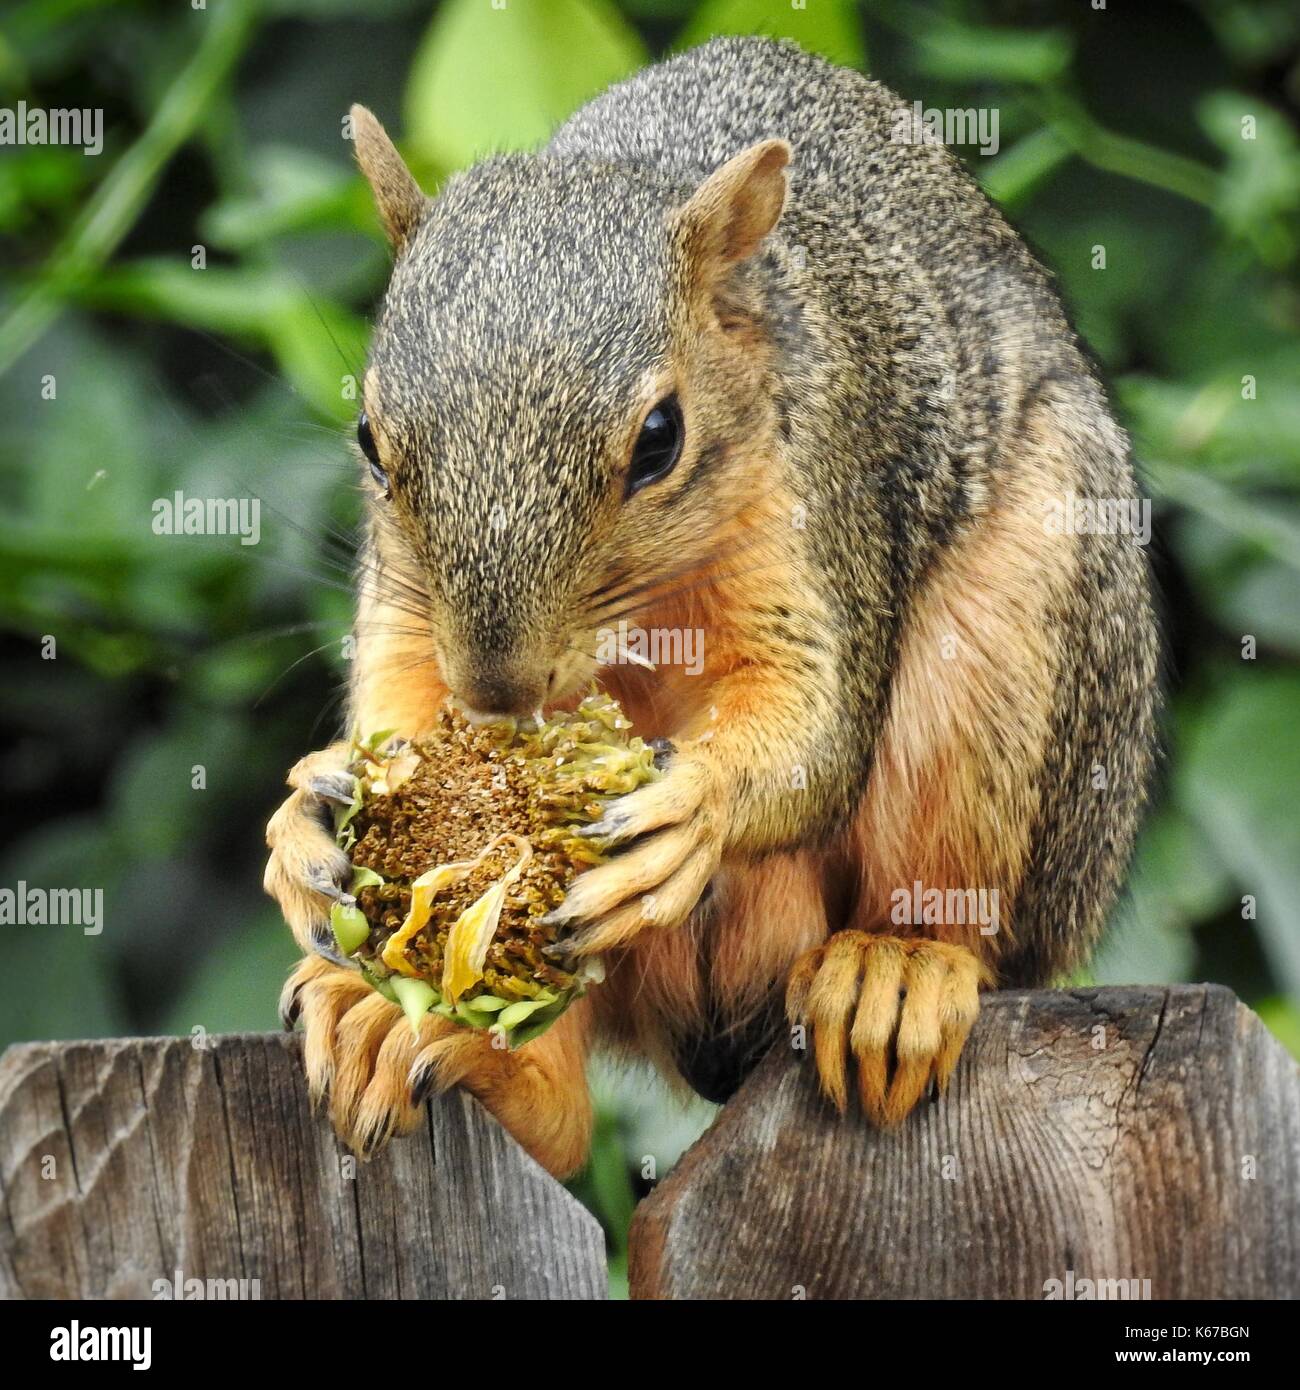 Squirrel eating a sunflower, Colorado, United States Stock Photo